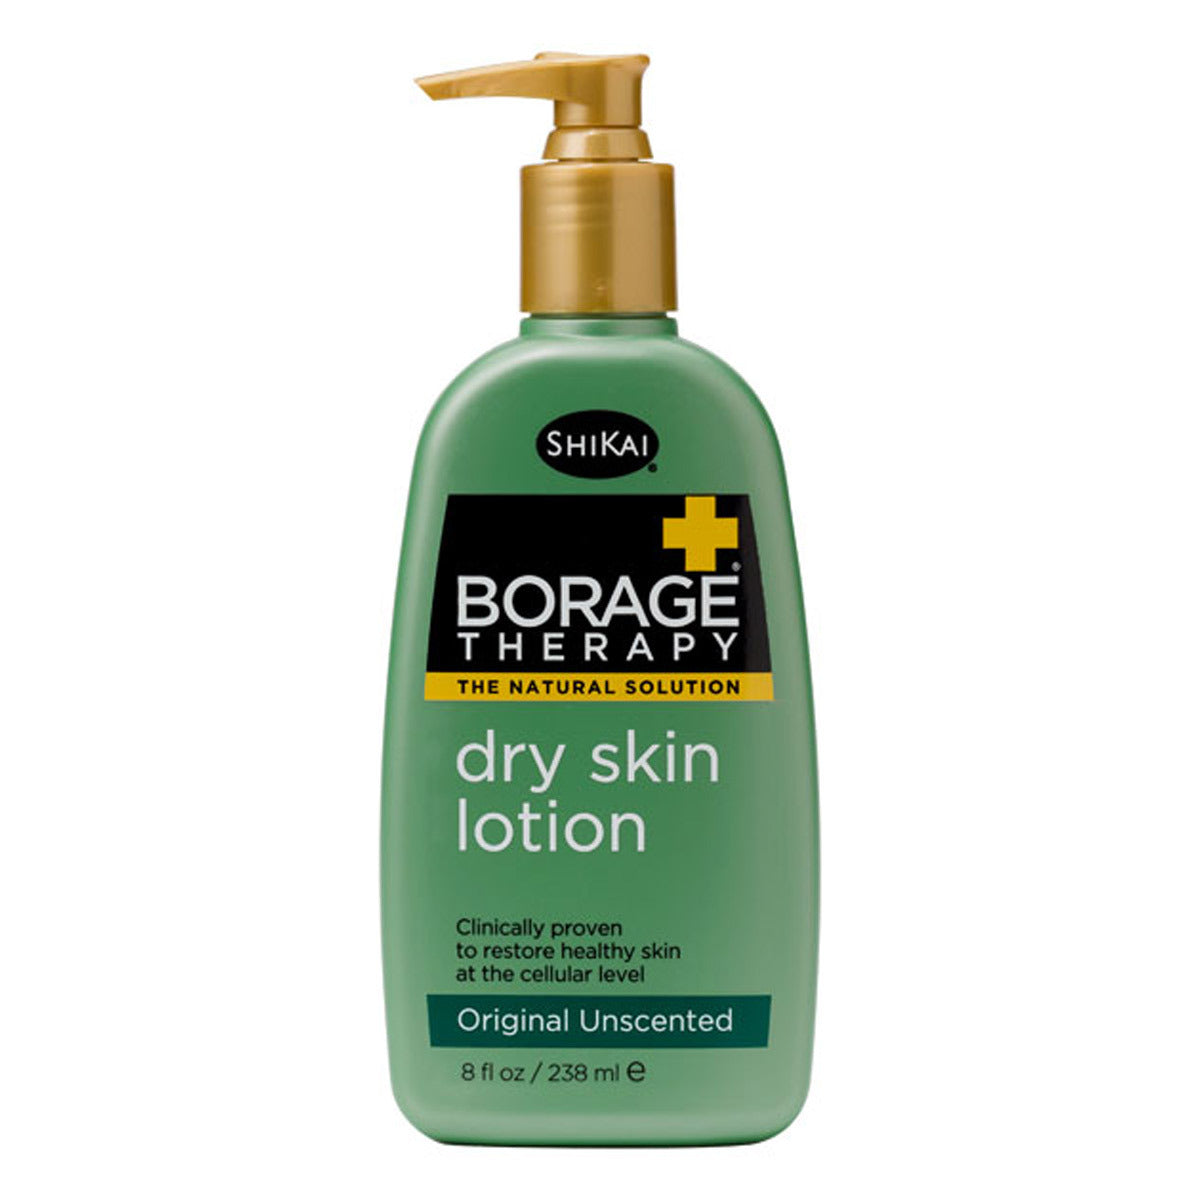 Primary image of Borage Therapy Dry Skin Lotion